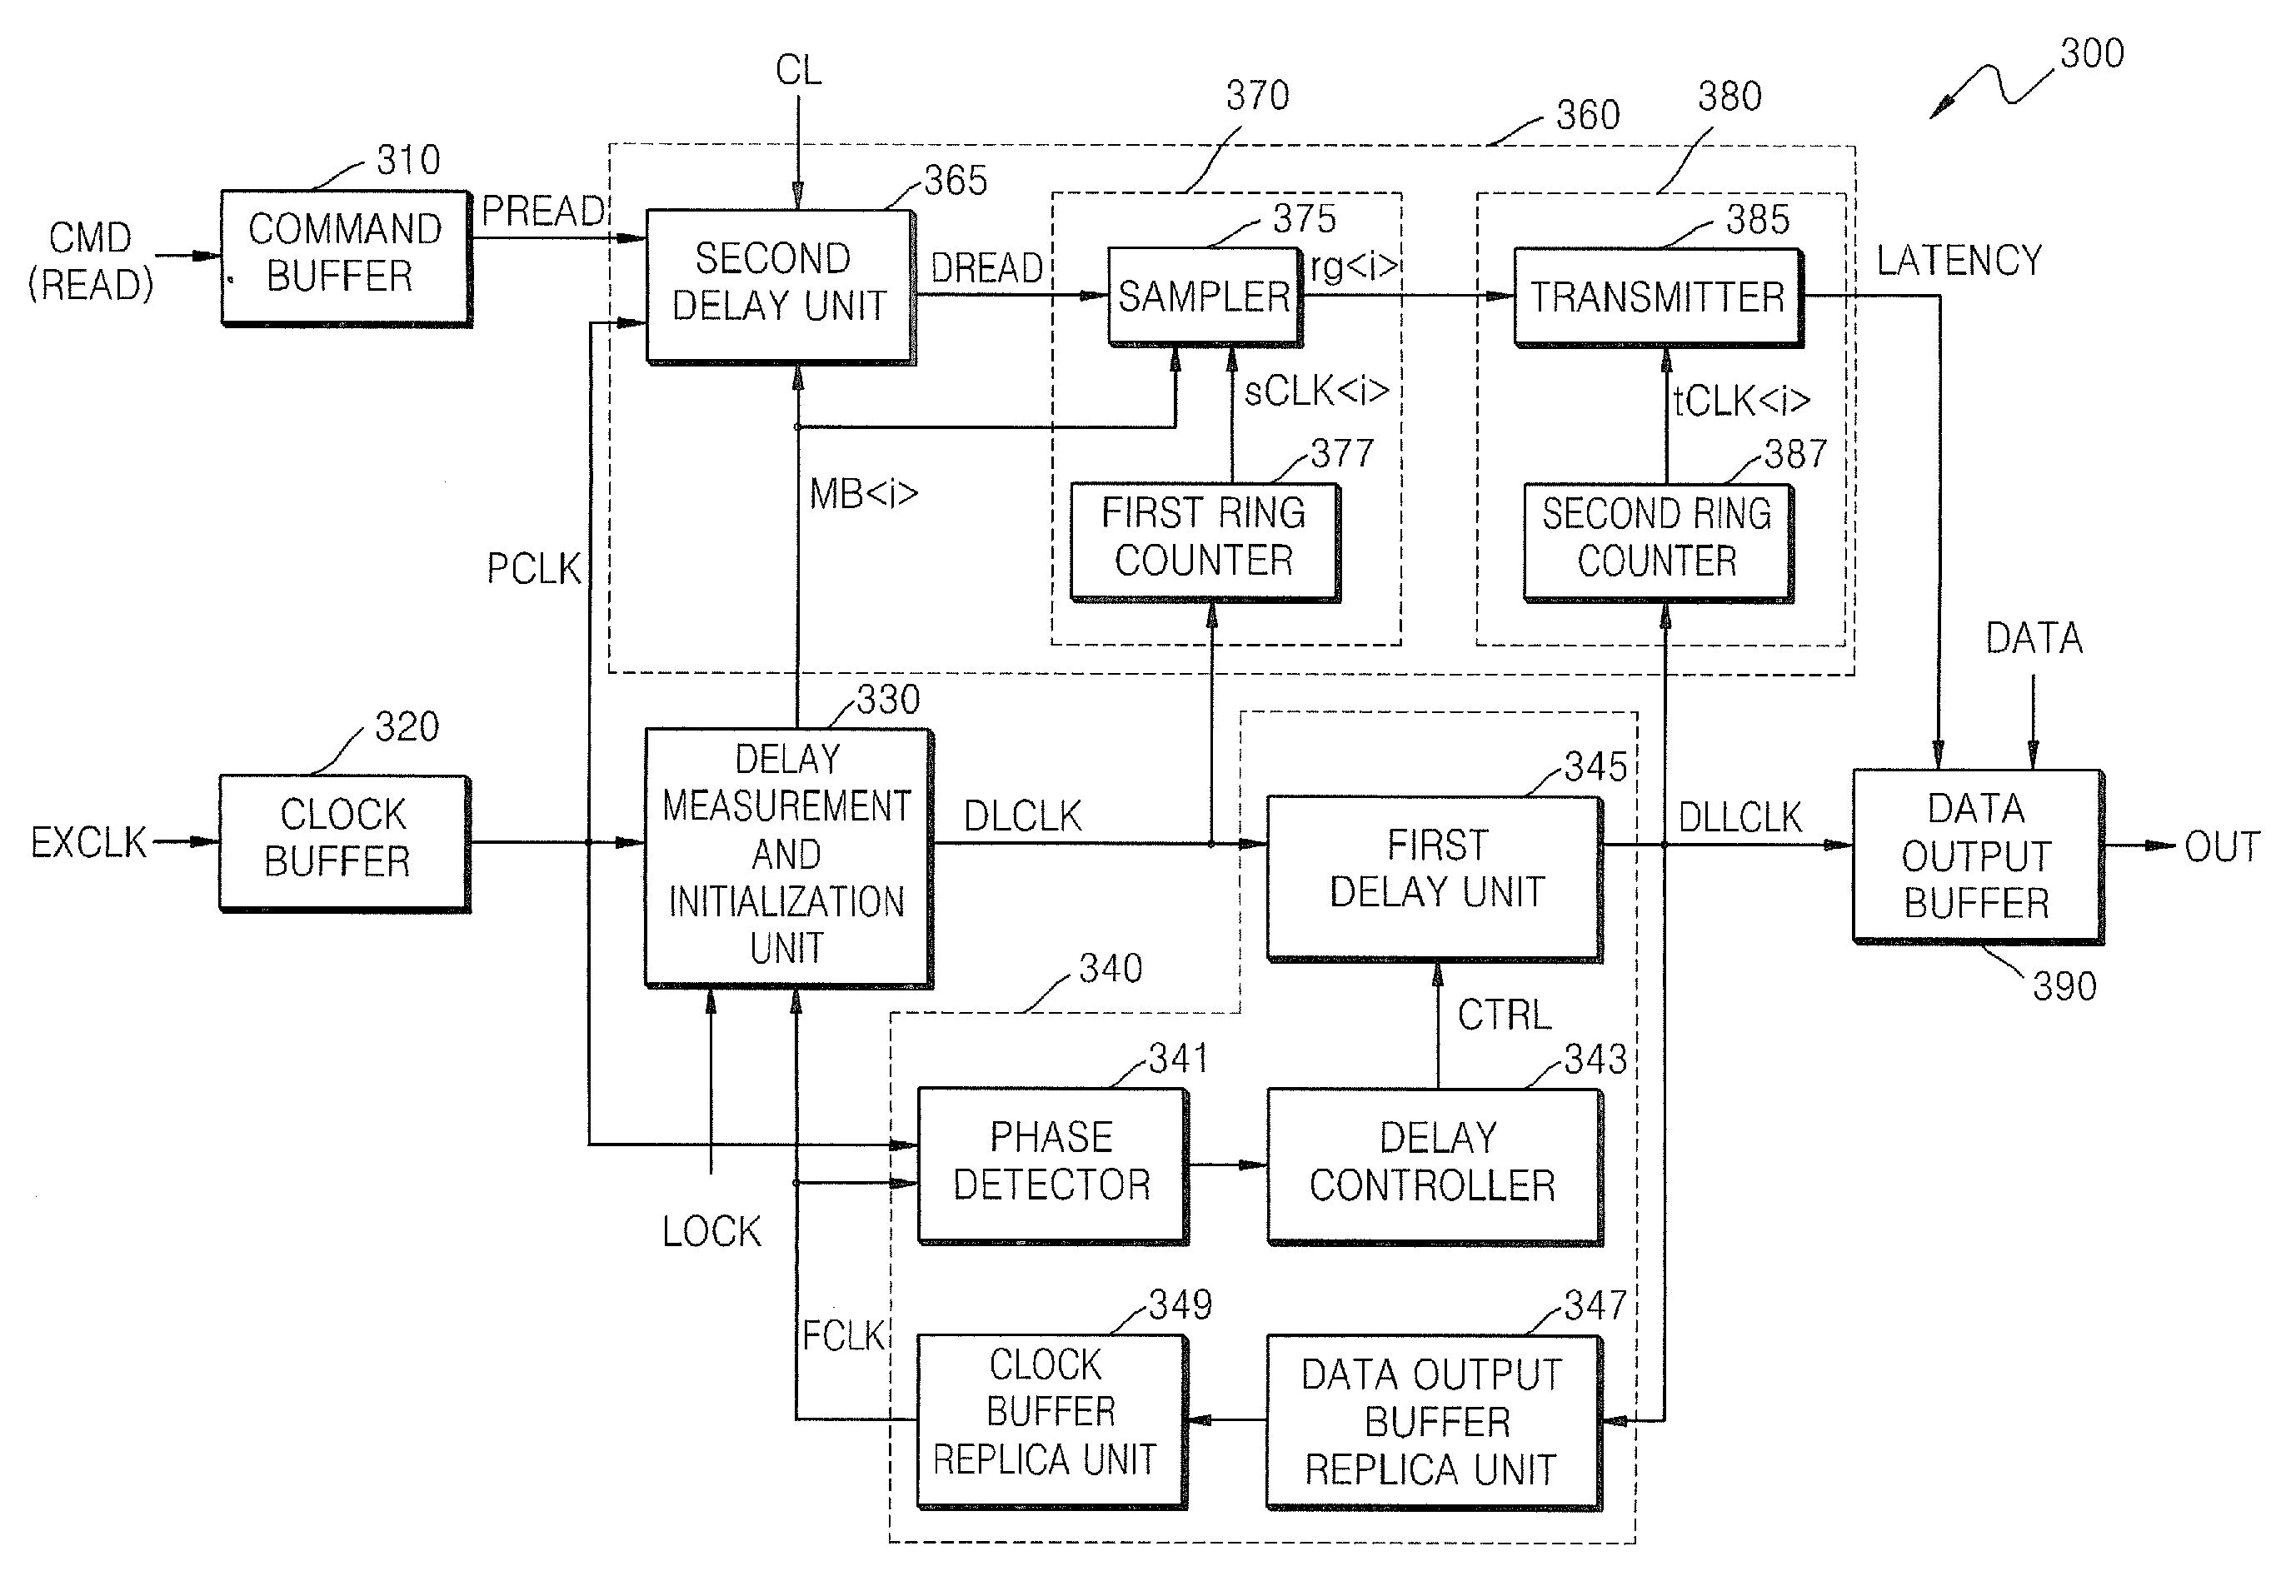 Semiconductor memory devices for controlling latency